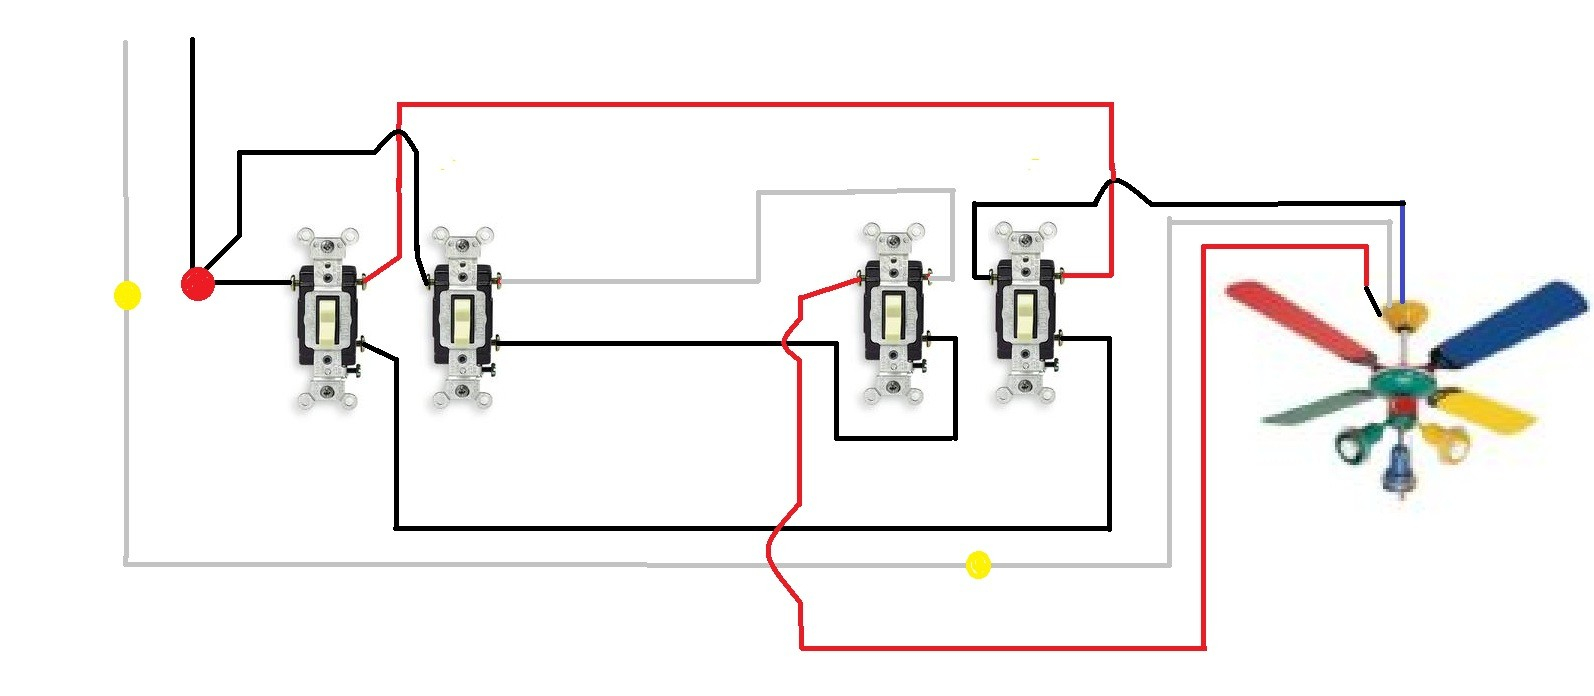 Three Way Switch Diagram Need Help Wiring Ceiling Fan With 4 3way Switches Wiring Diagrams Show